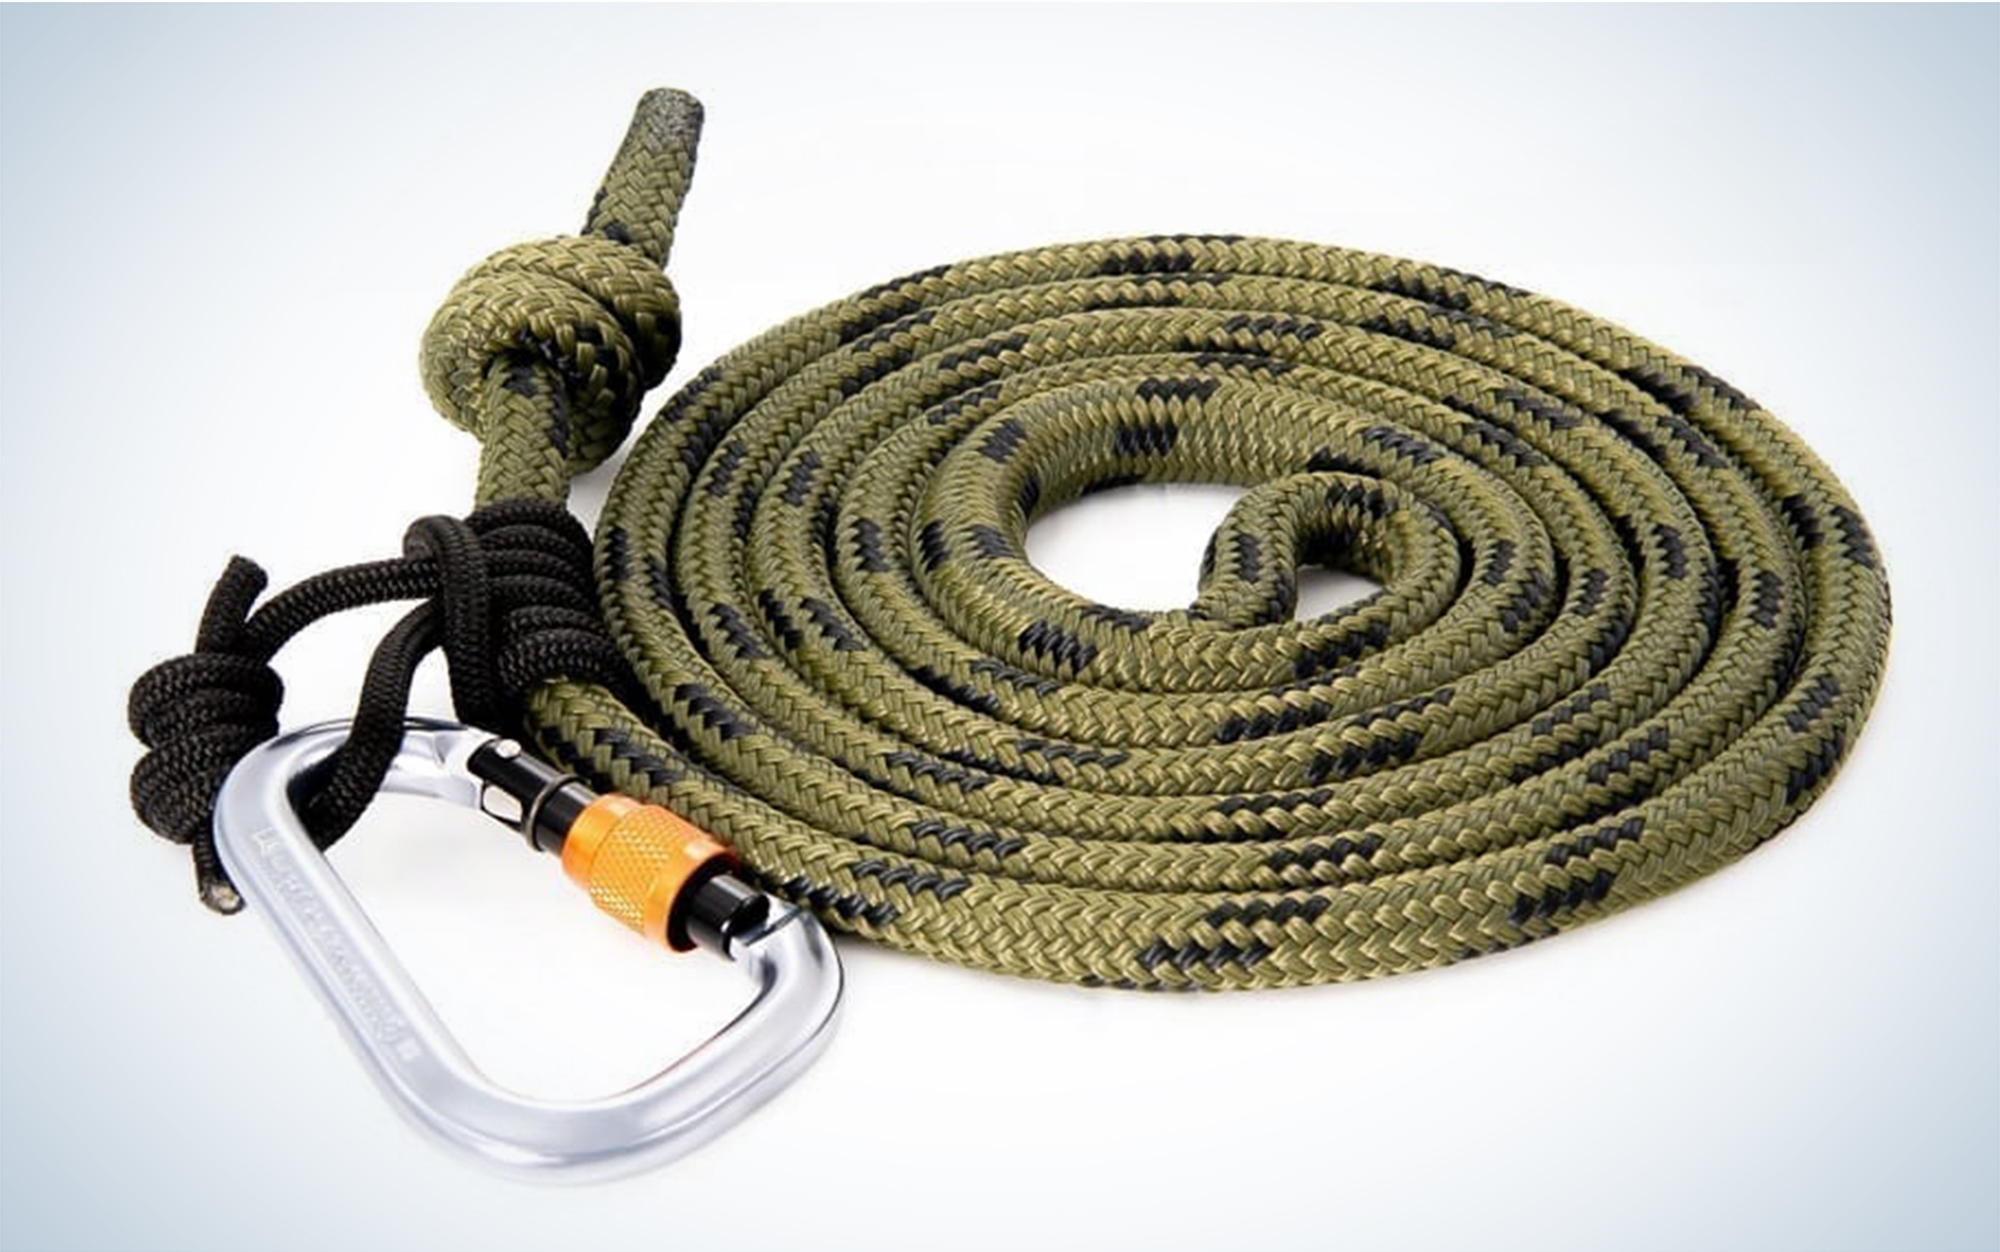 You need a lineman’s rope for treestand safety.